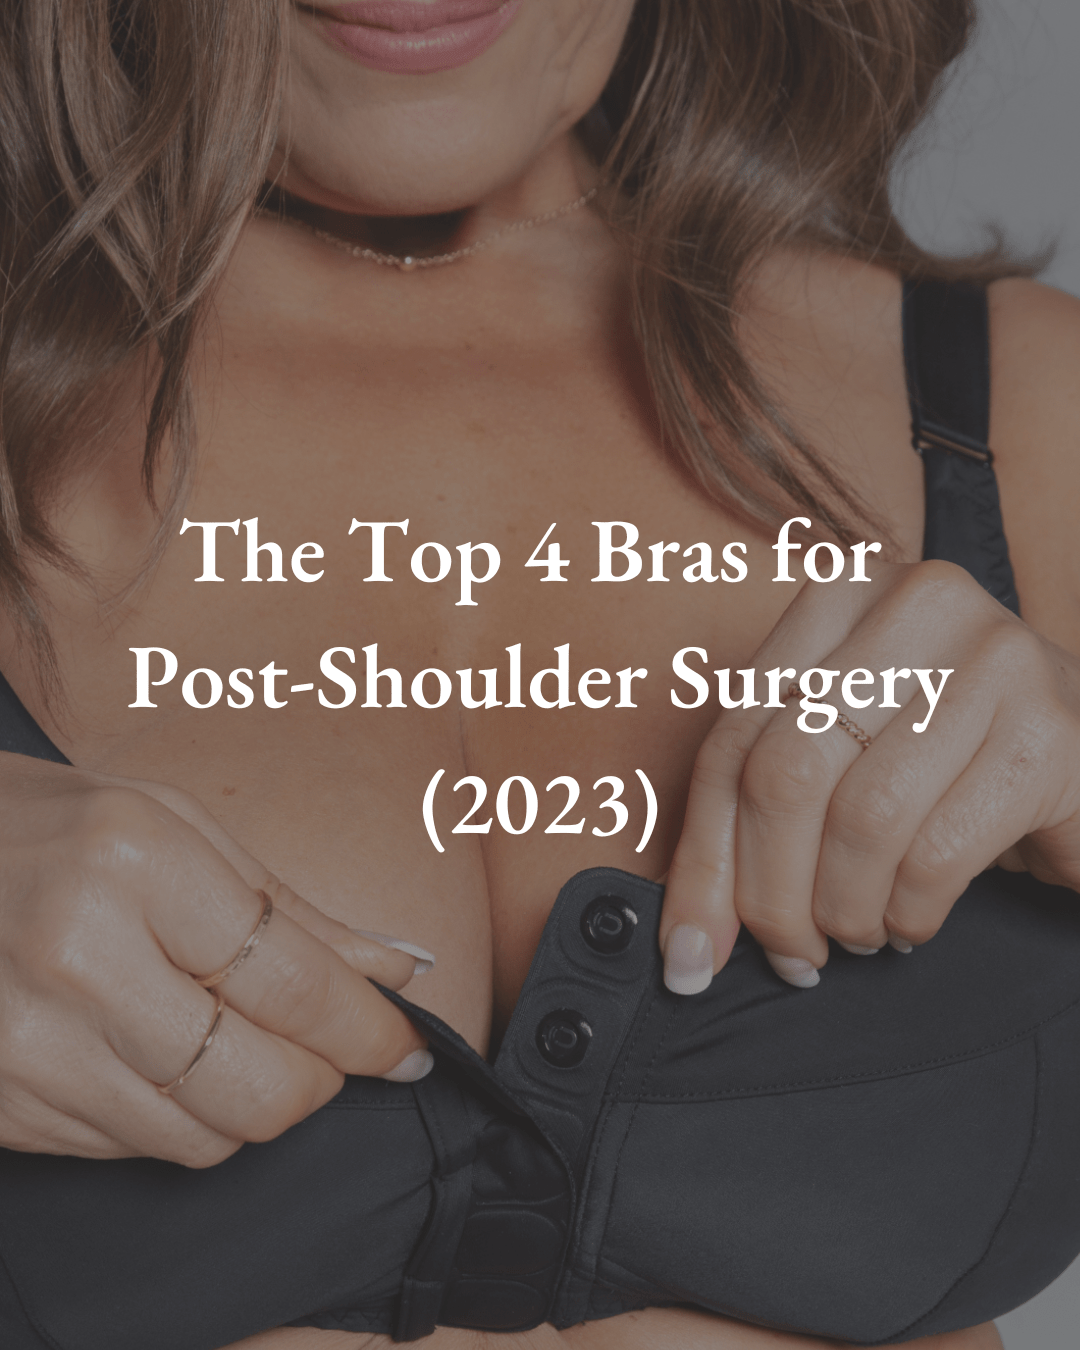 The Top 4 Bras for Post-Shoulder Surgery (2023) – Liberare